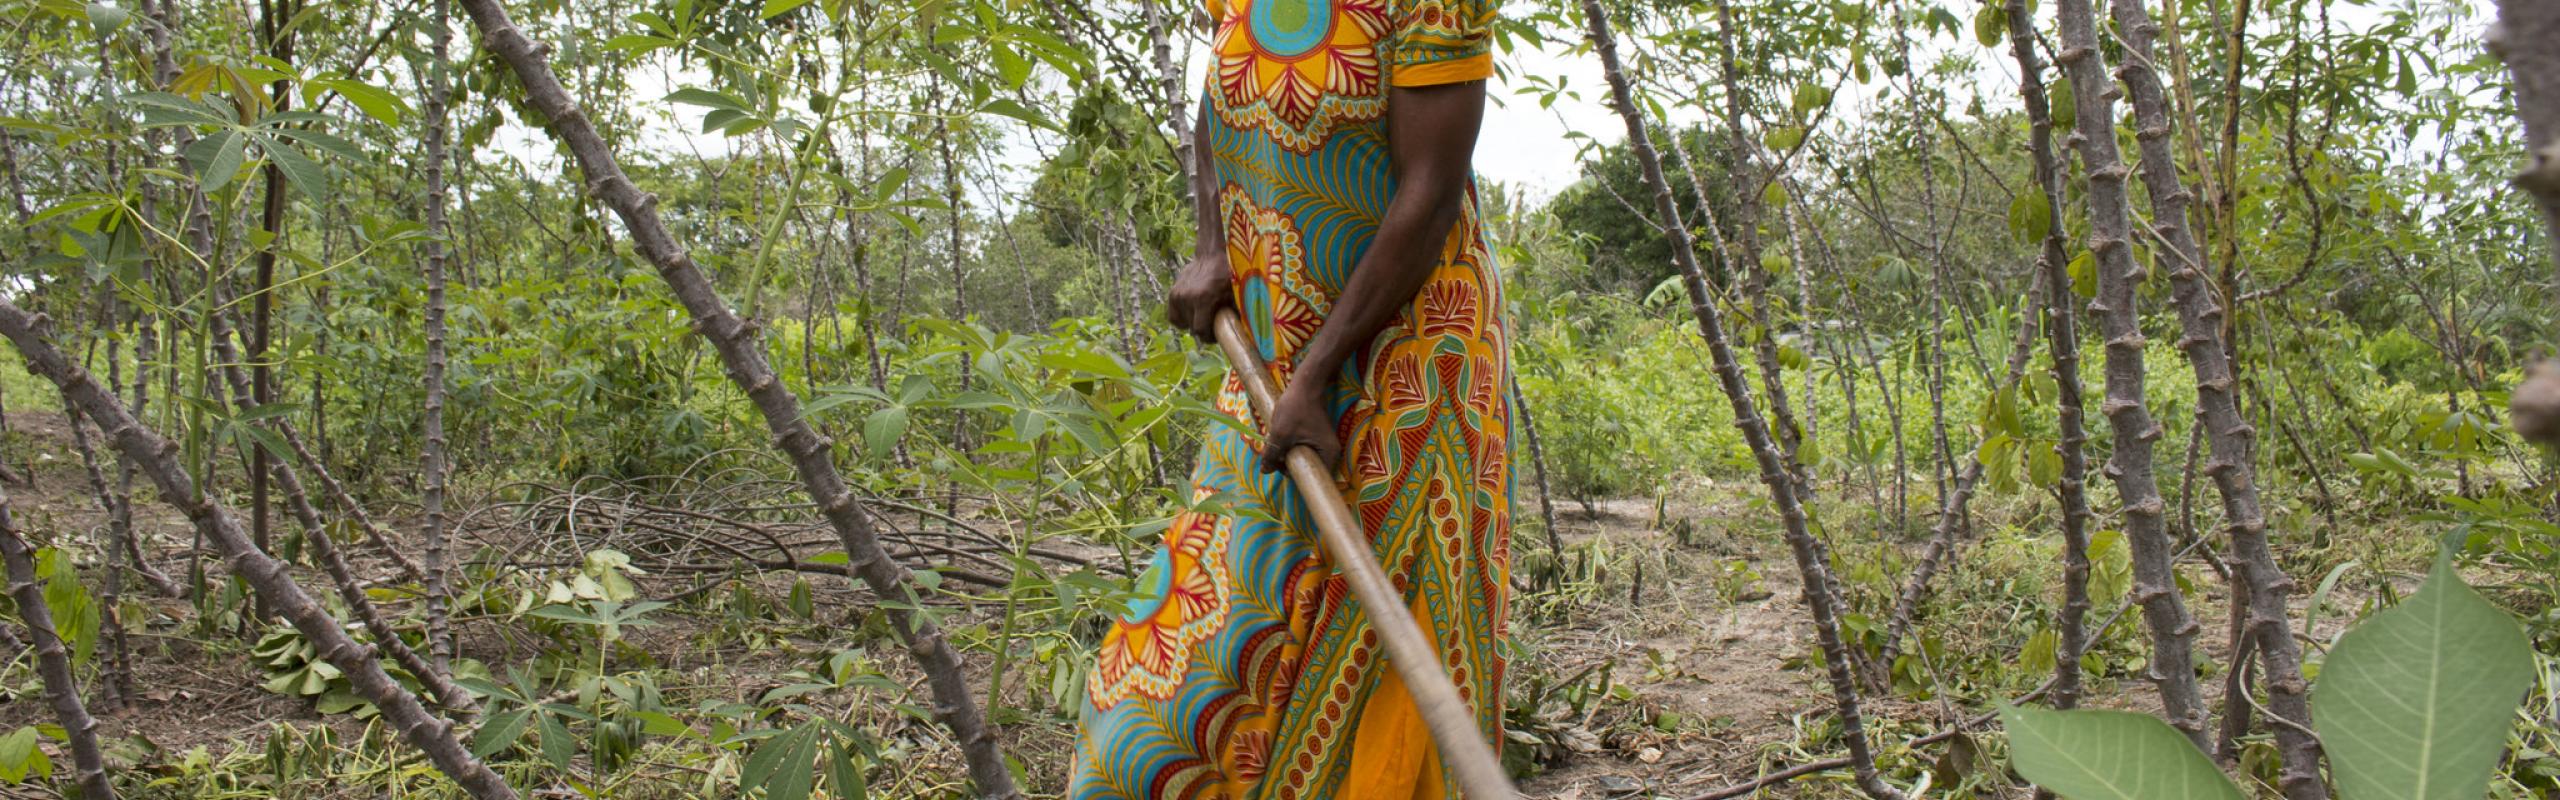 Tanzanian woman in yellow headscarf and orange and green dress works with a hoe in cassava field